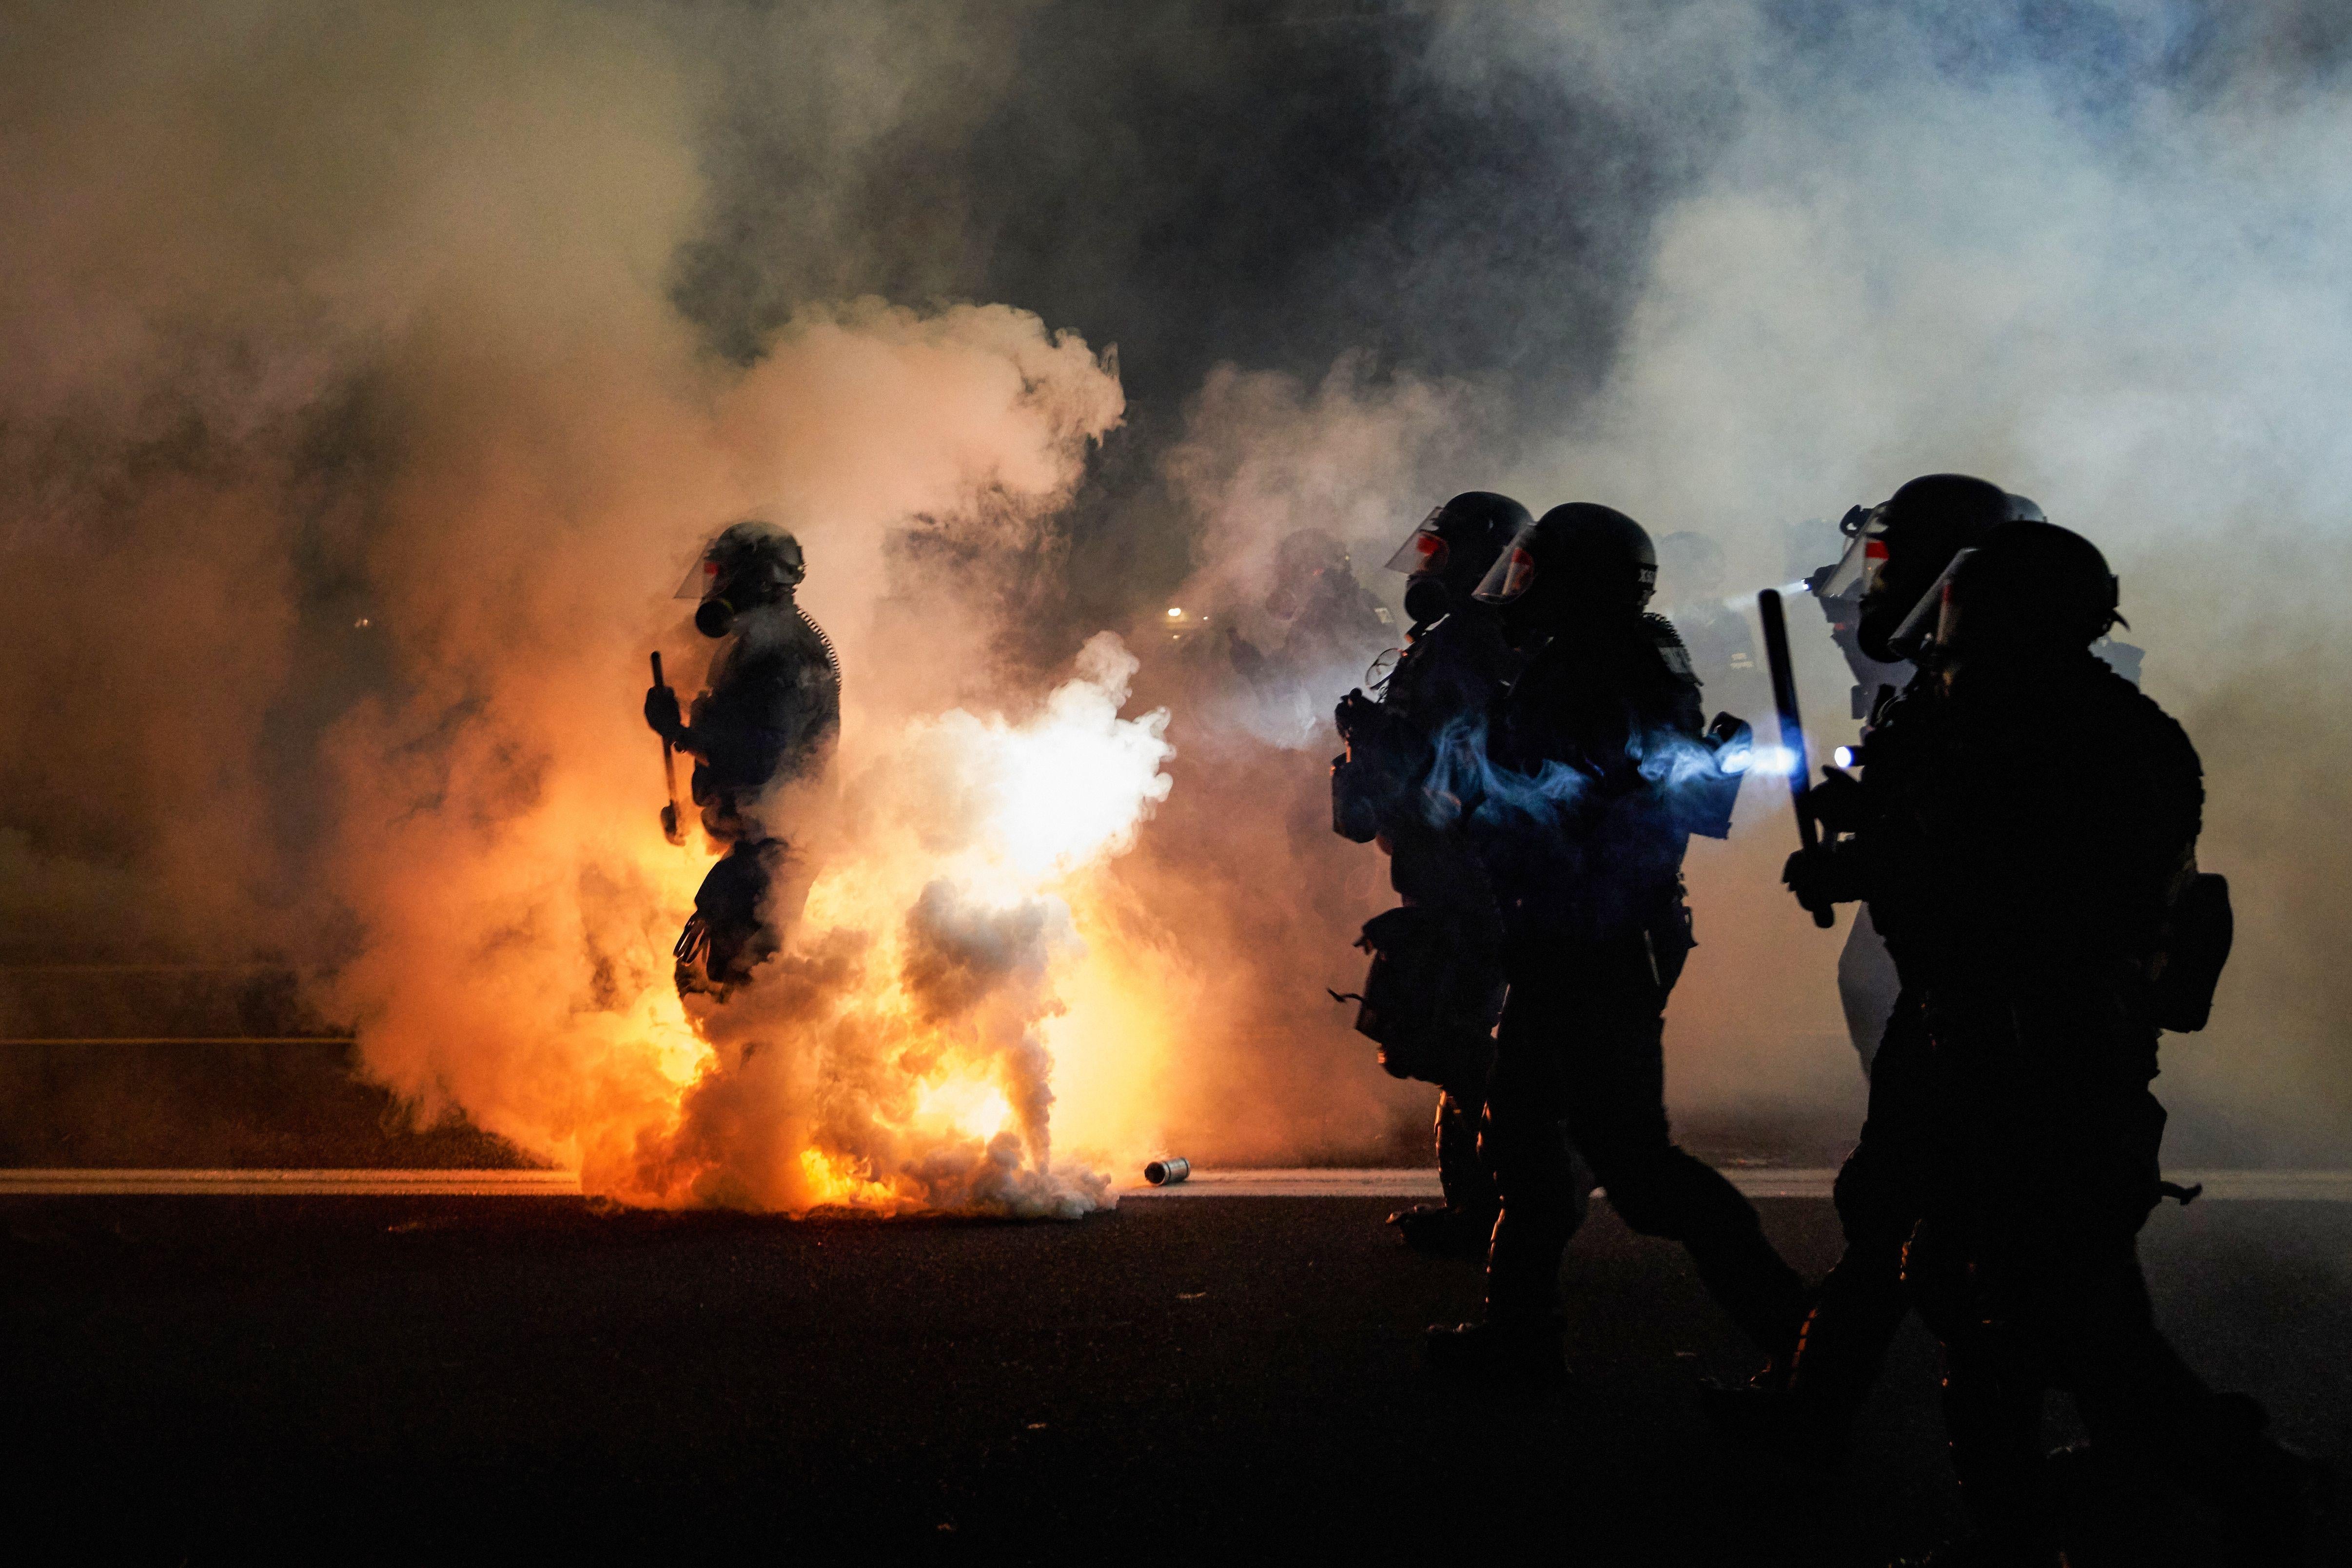 Police wearing riot gear and holding batons walk through tear gas at night